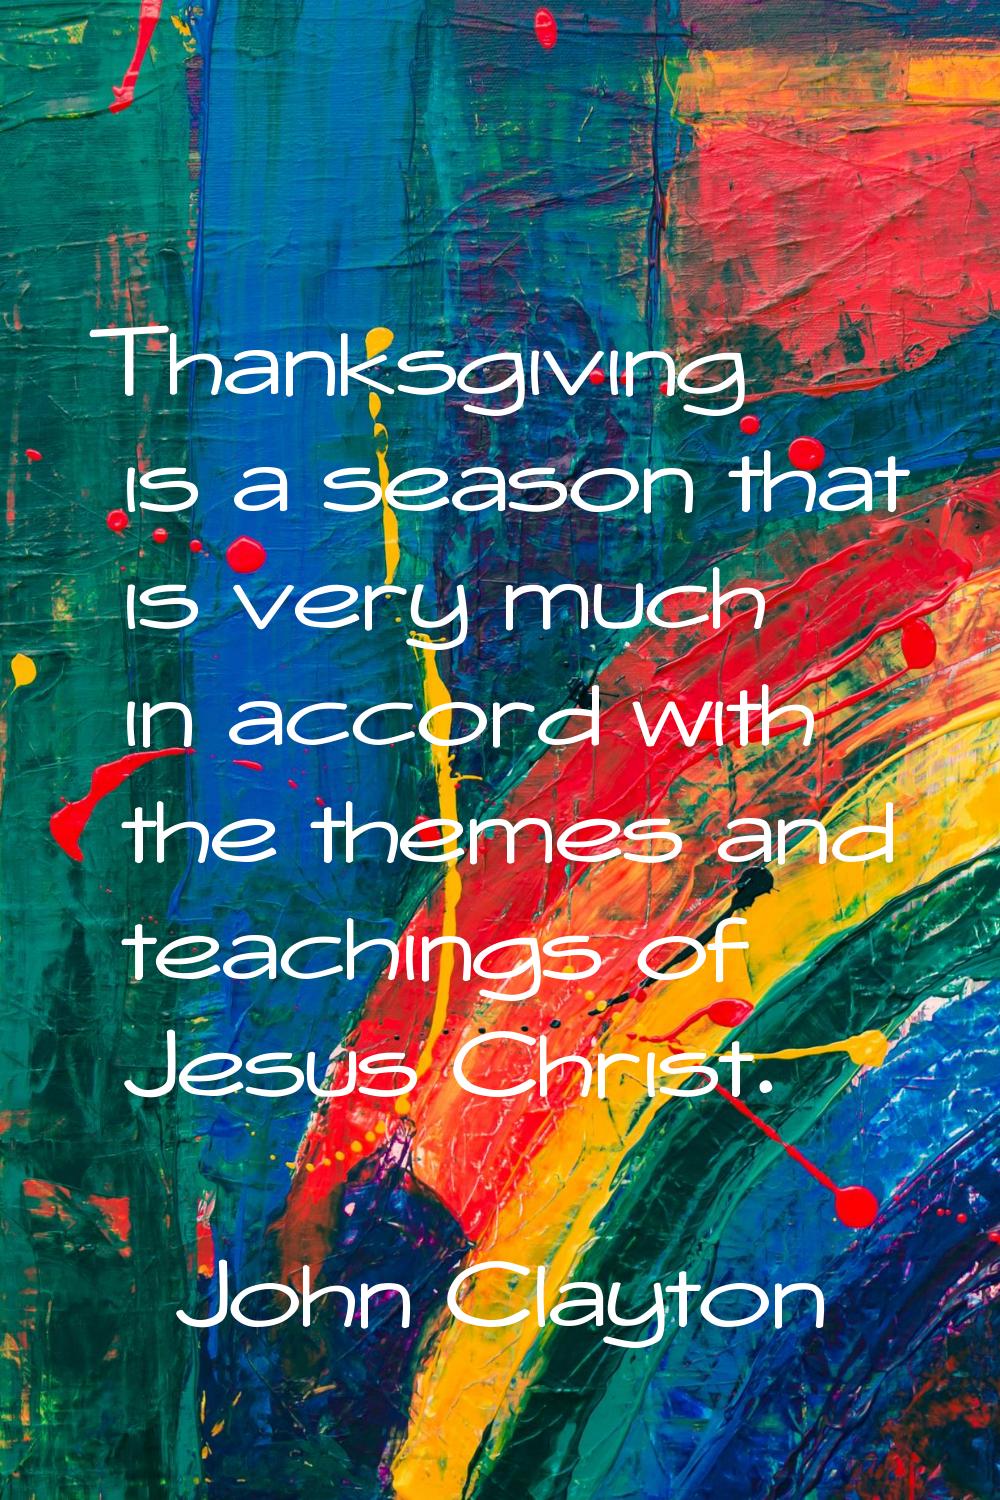 Thanksgiving is a season that is very much in accord with the themes and teachings of Jesus Christ.